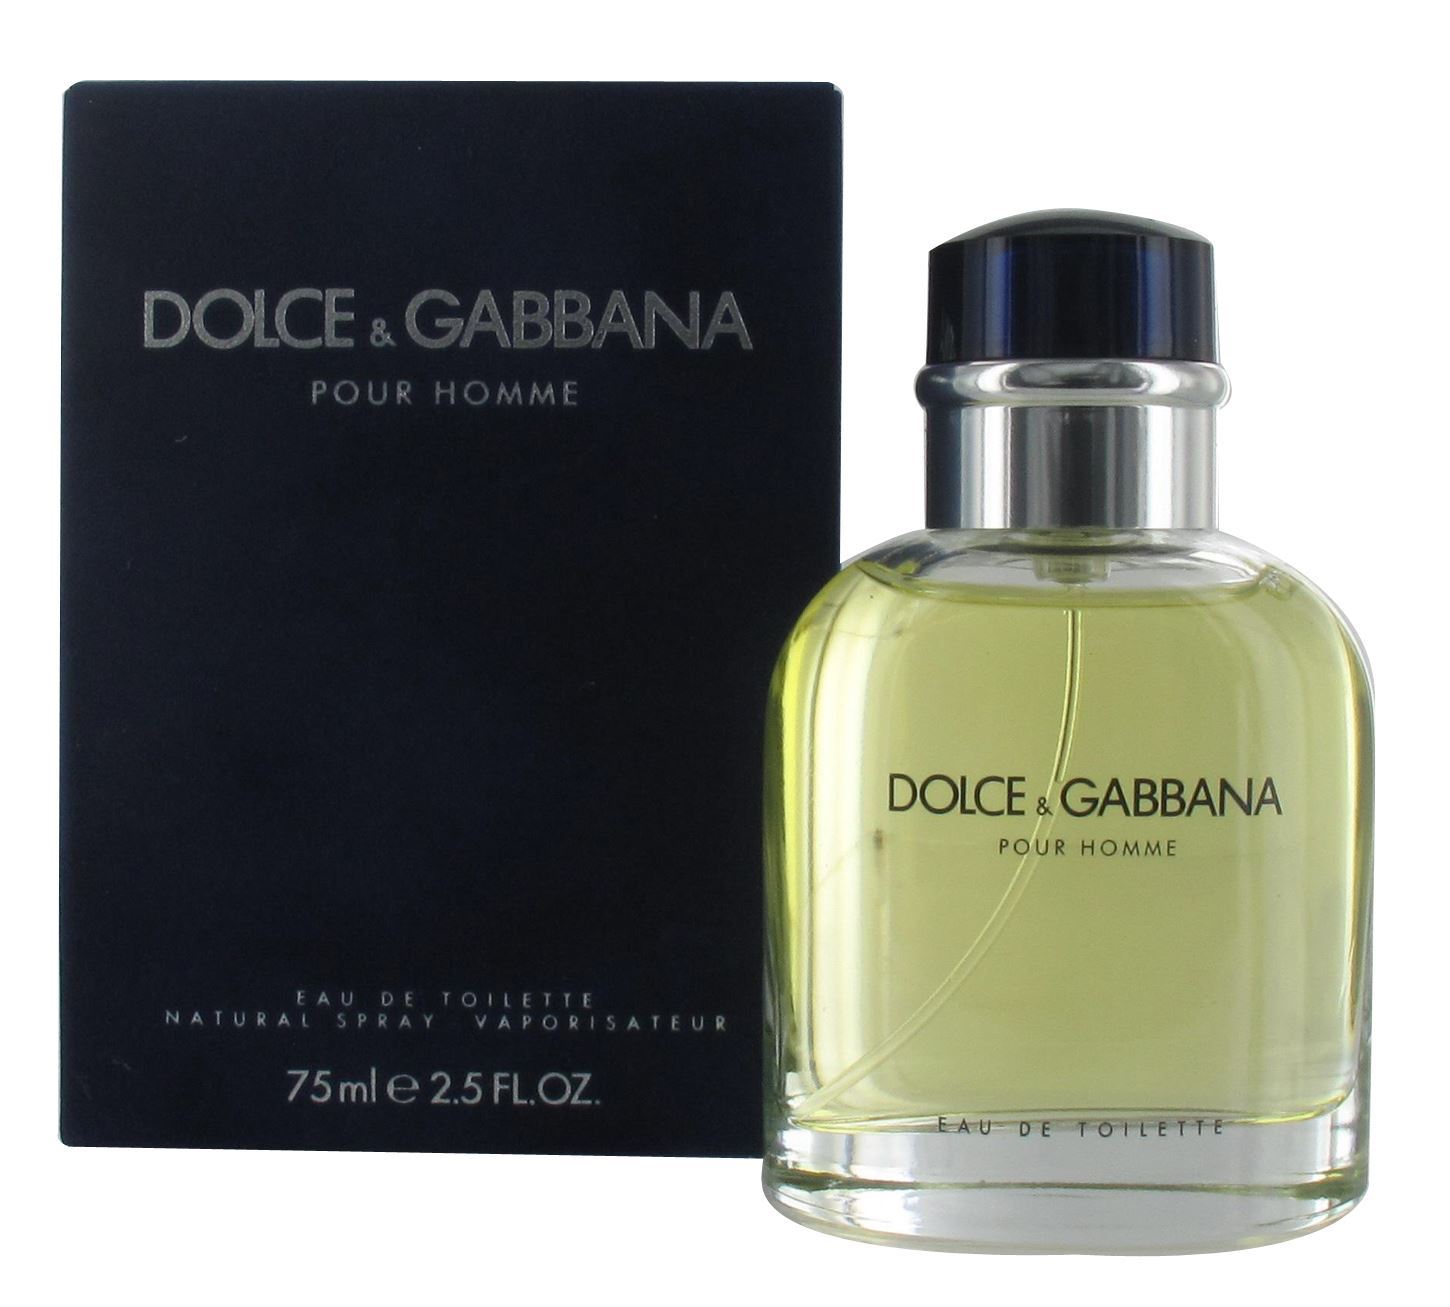 Dolce and Gabbana Pour Homme Eau de Toilette 75ml Spray for Him from Perfume Plus Direct